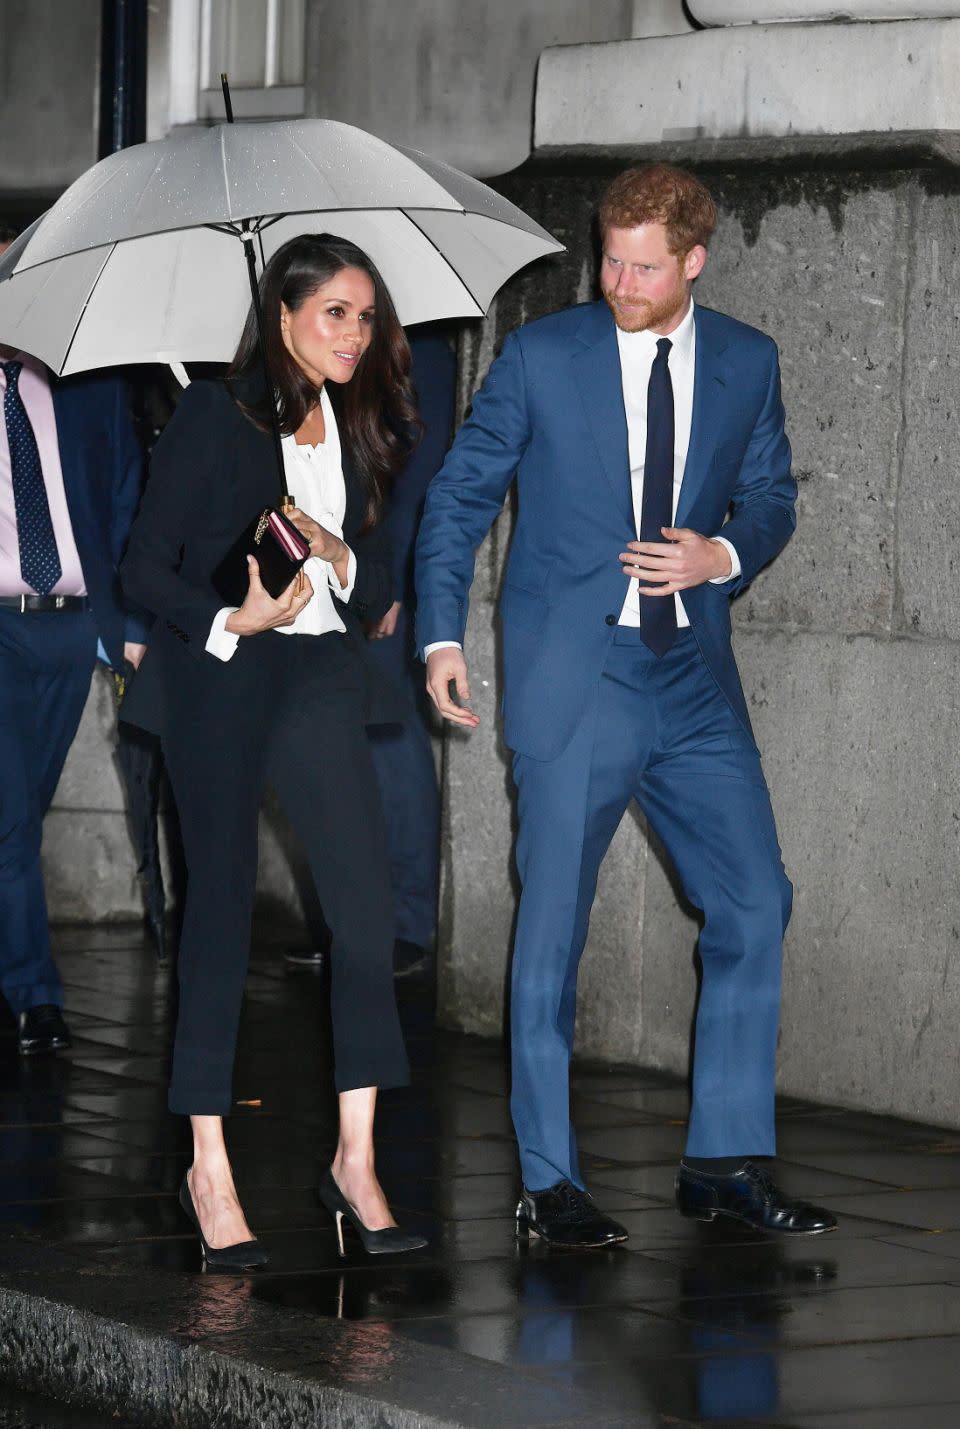 Meghan arrived on the arm of Prince Harry. Photo: Getty Images